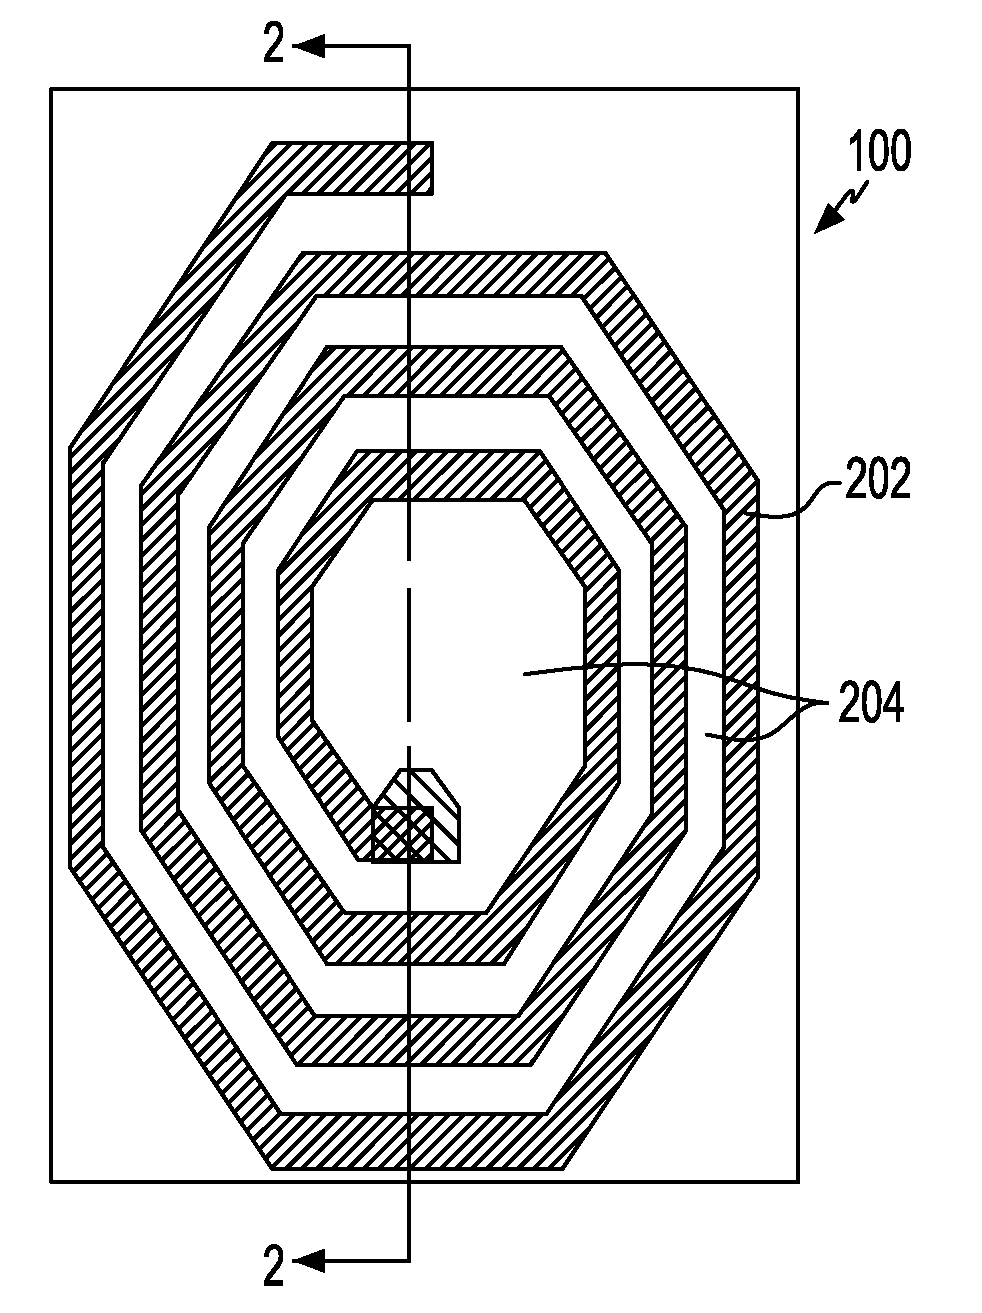 High frequency inductor structure having increased inductance density and quality factor